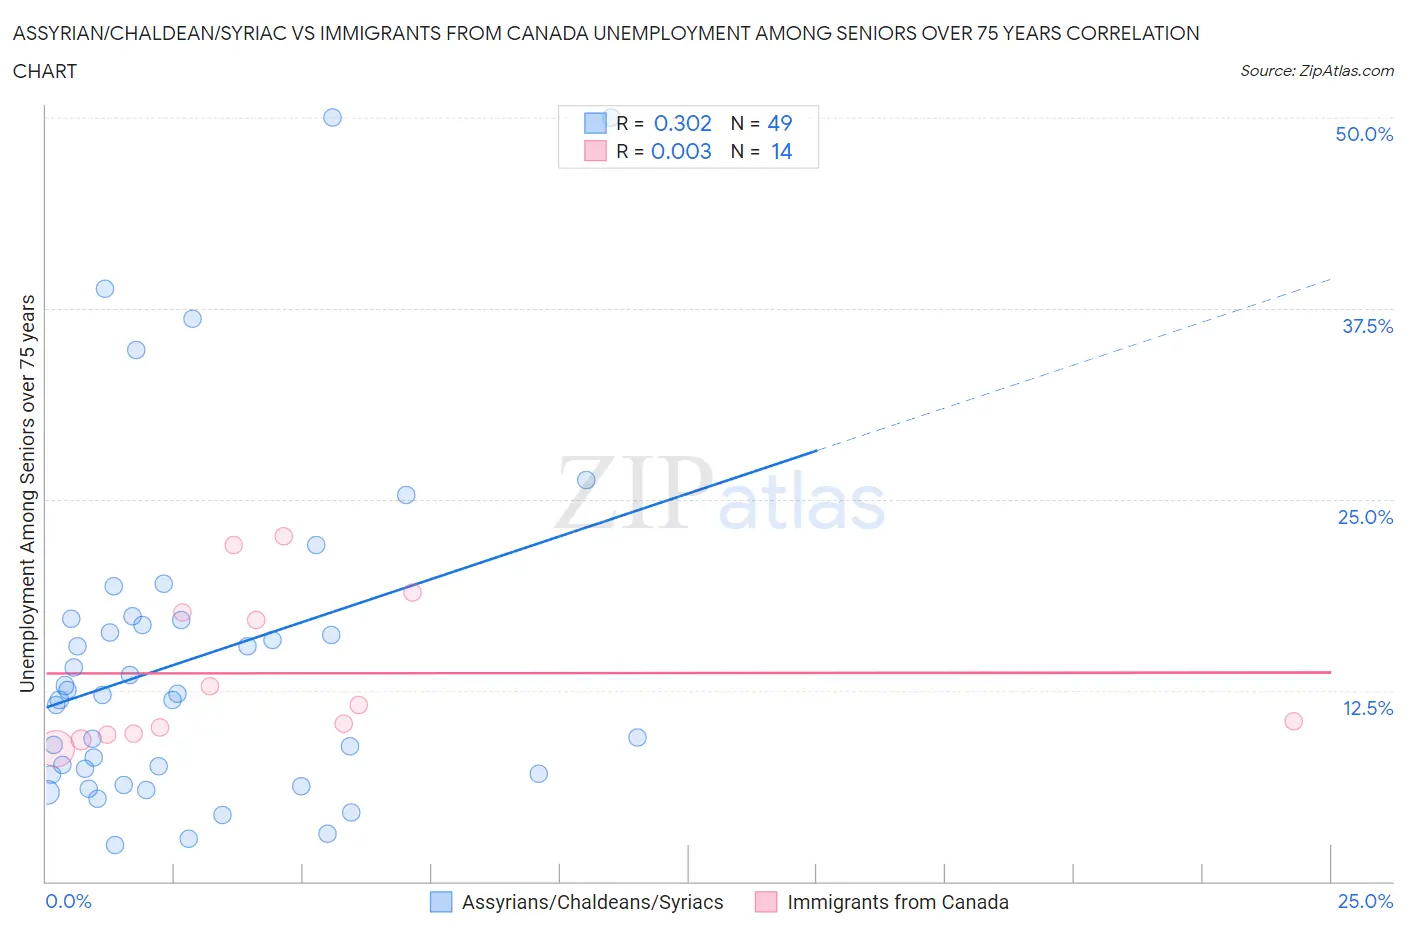 Assyrian/Chaldean/Syriac vs Immigrants from Canada Unemployment Among Seniors over 75 years